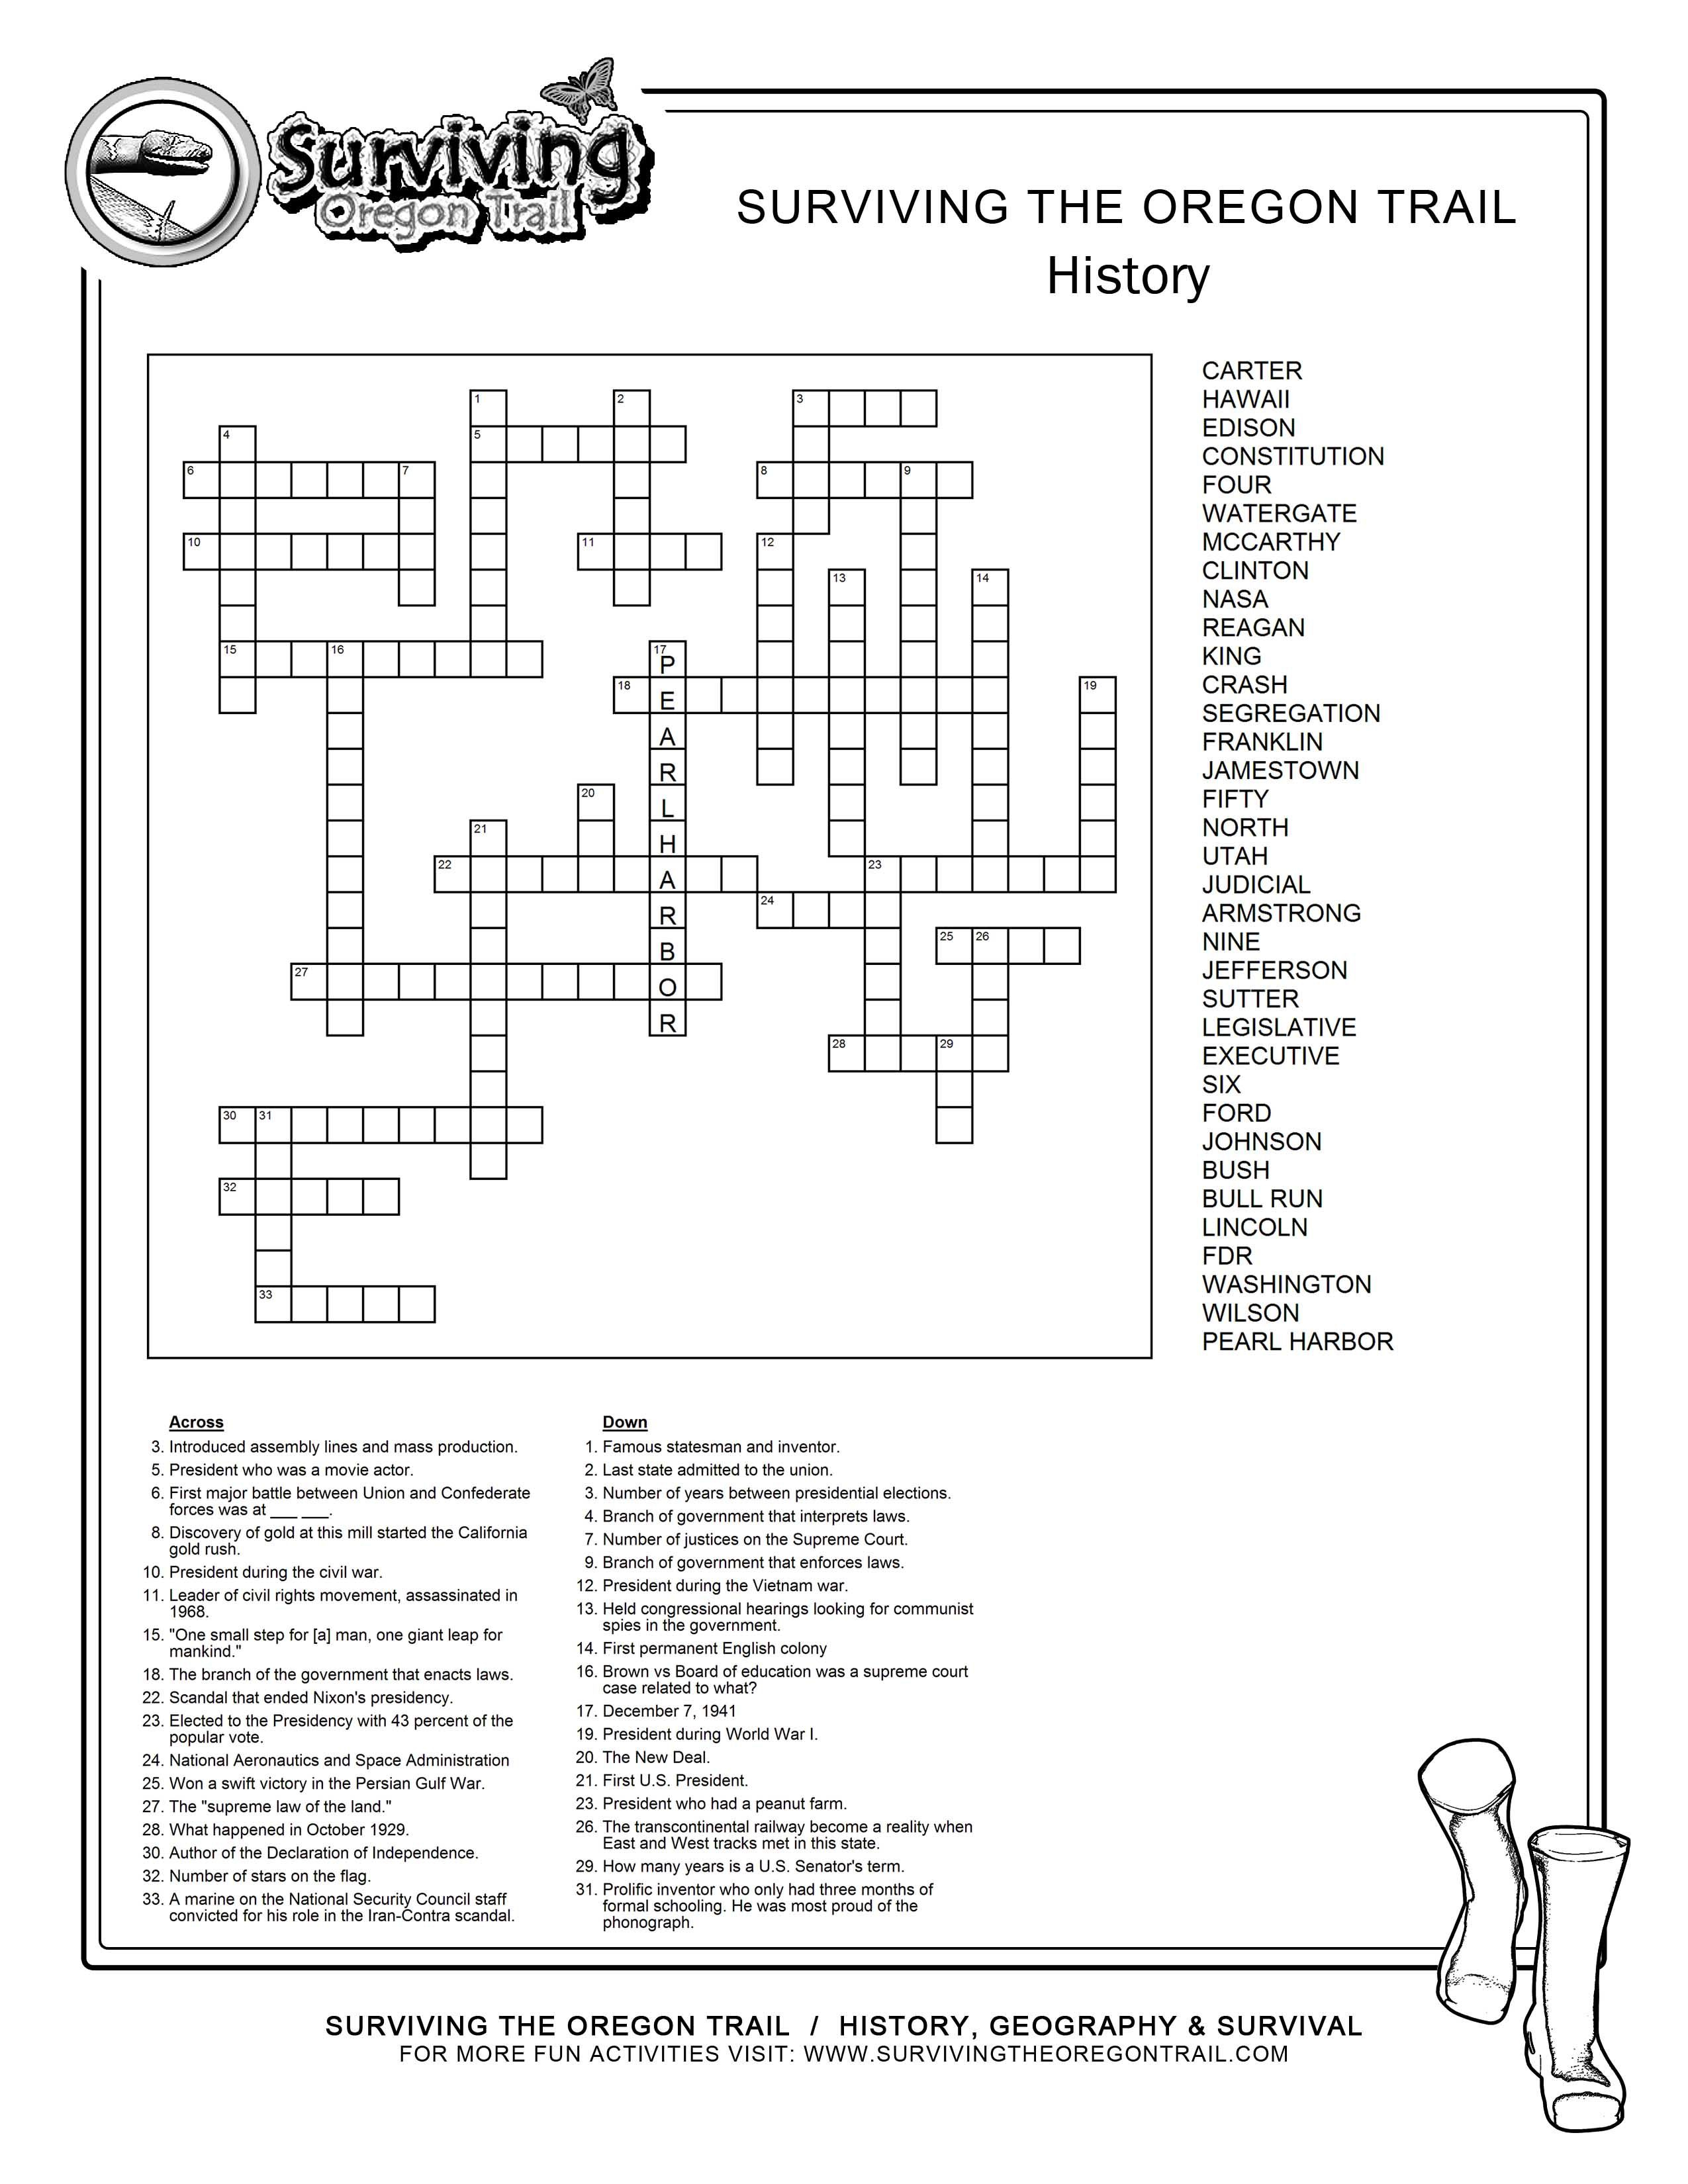 Fill Free To Save This Historical Crossword Puzzle To Your Computer - Printable Geography Crossword